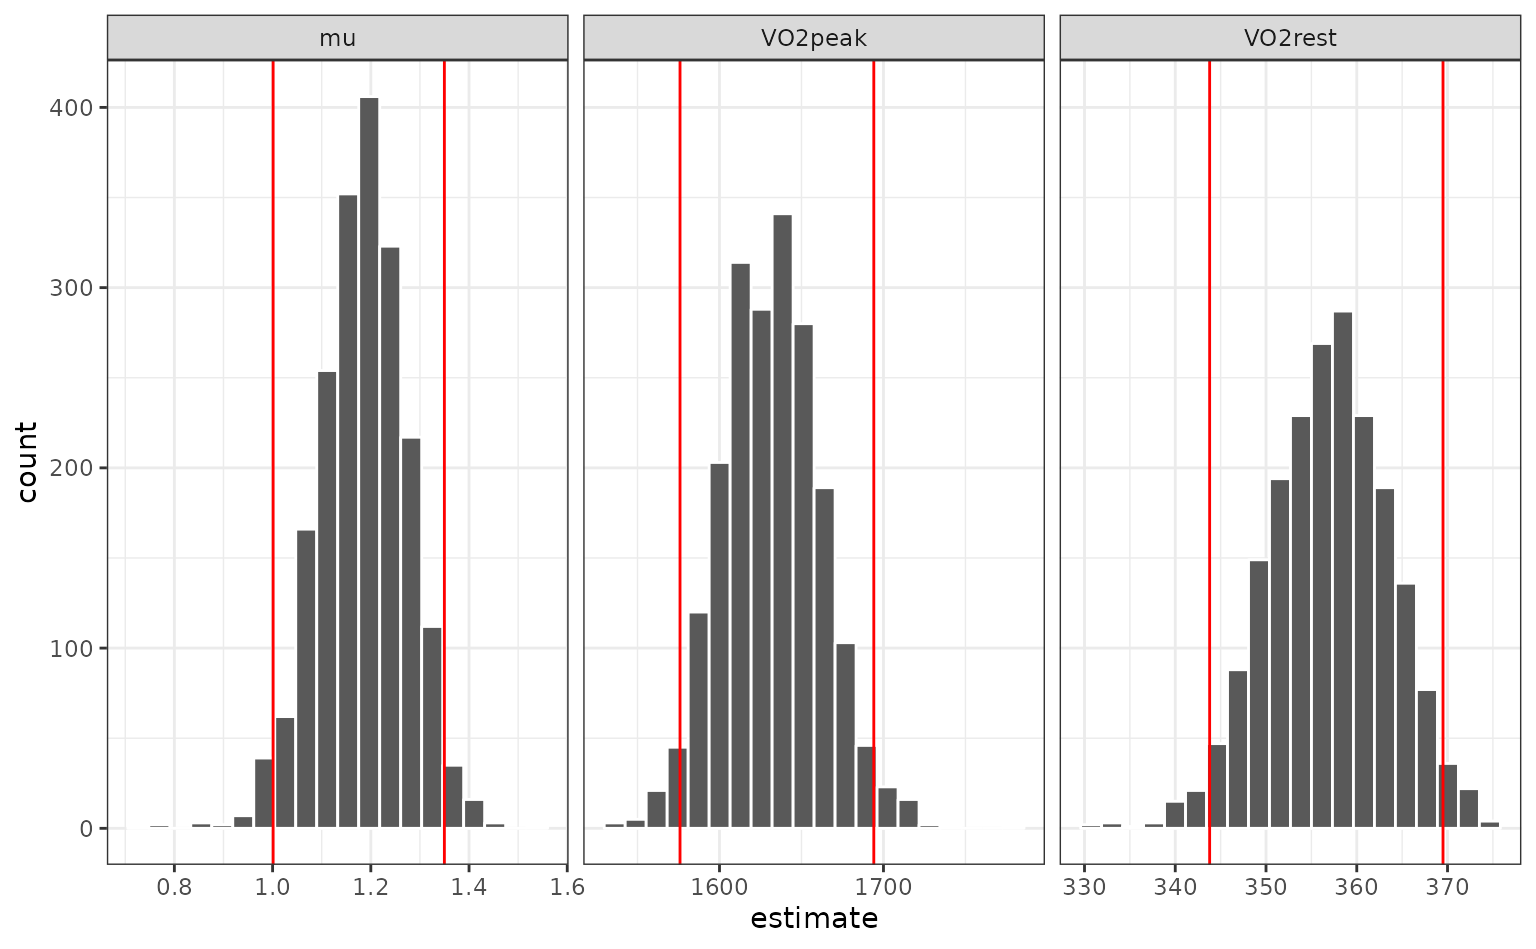 The three histograms for mu, VO2peak, and VO2rest with added vertical lines for the estimated lower and upper bounds of the percentile intervals.